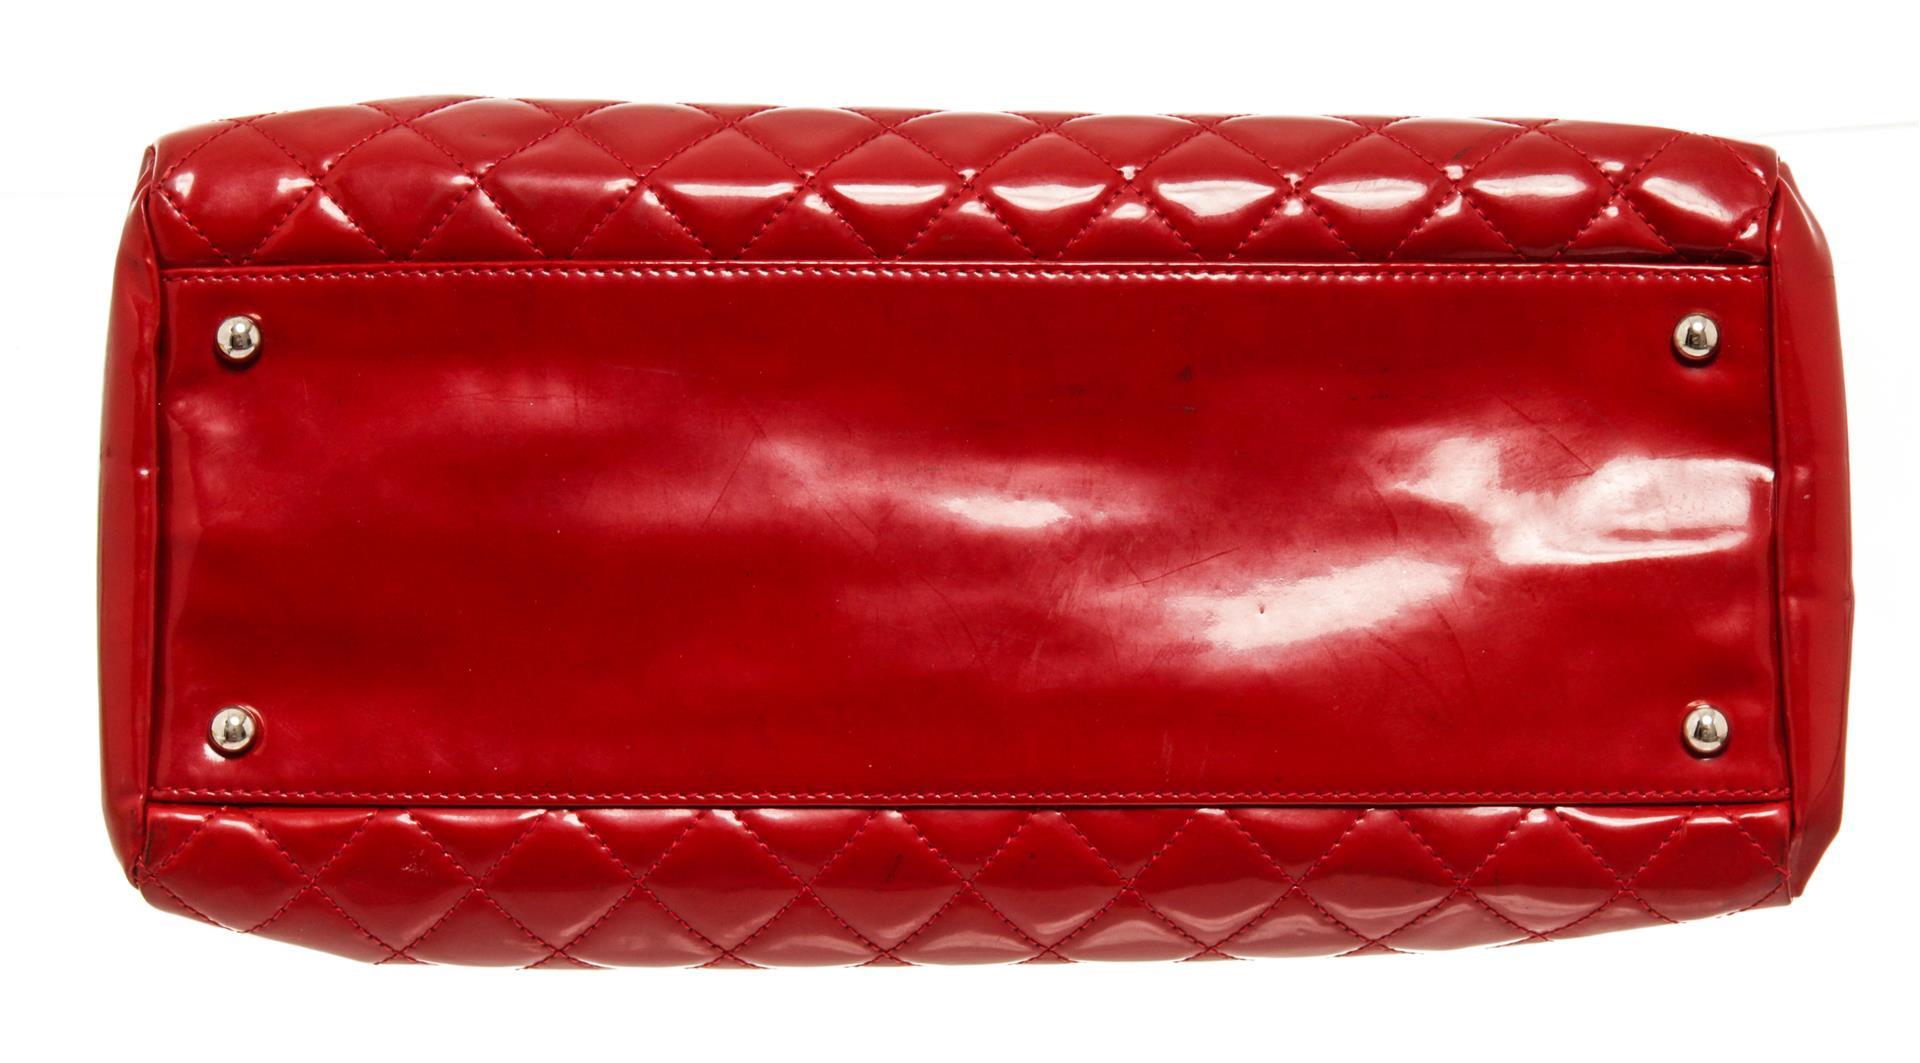 Chanel Red Leather Mademoiselle Bowler Bag